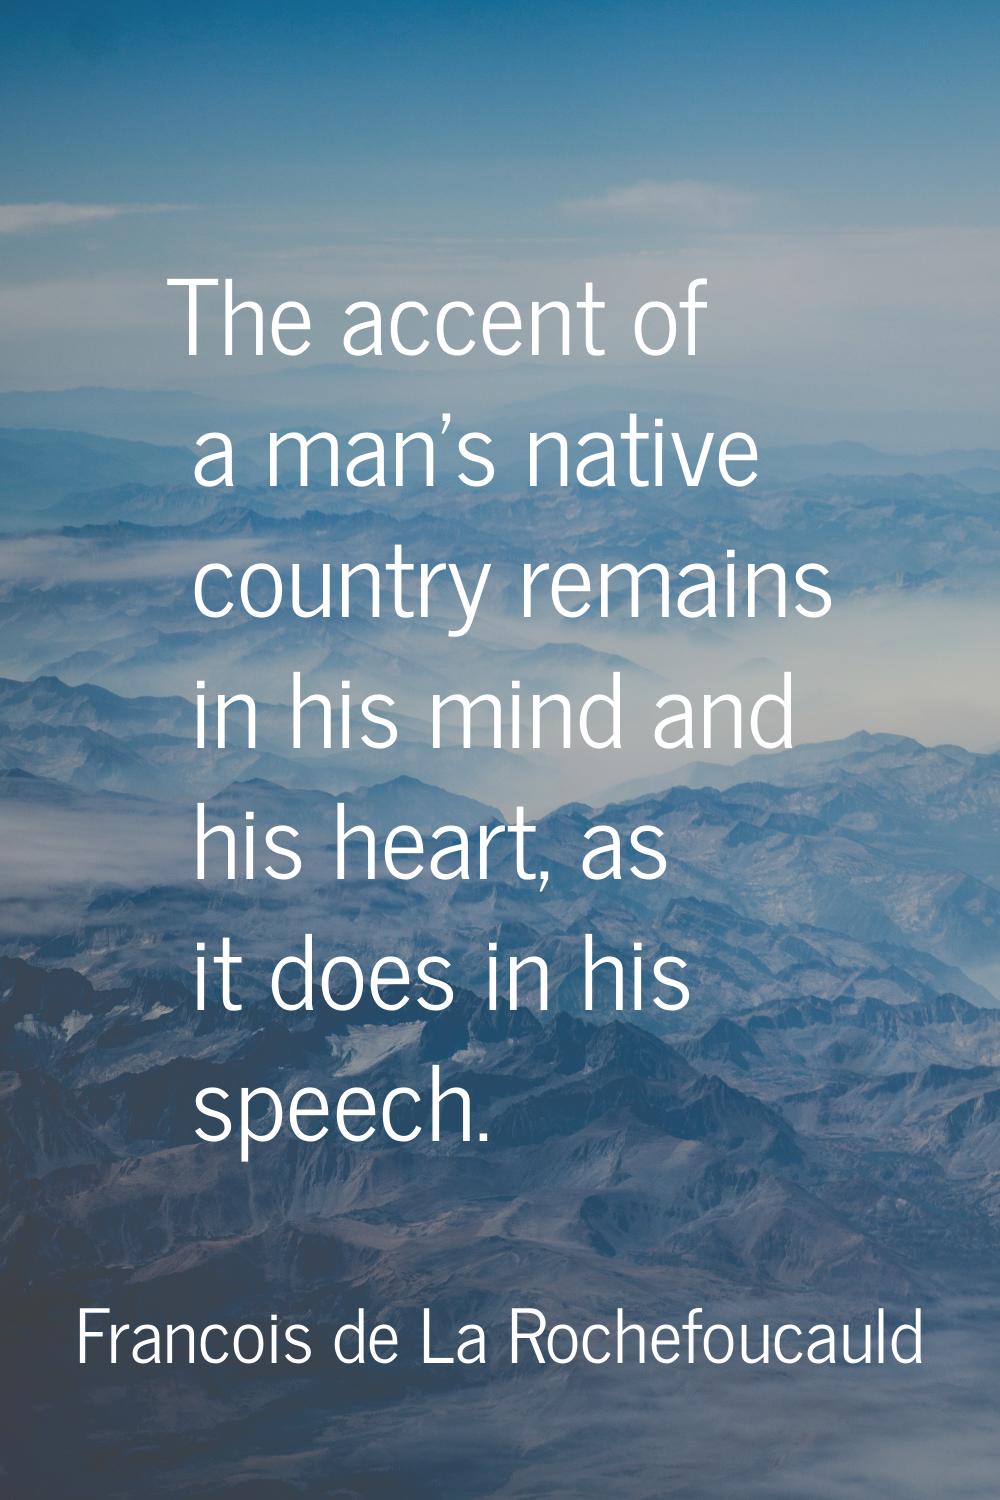 The accent of a man's native country remains in his mind and his heart, as it does in his speech.